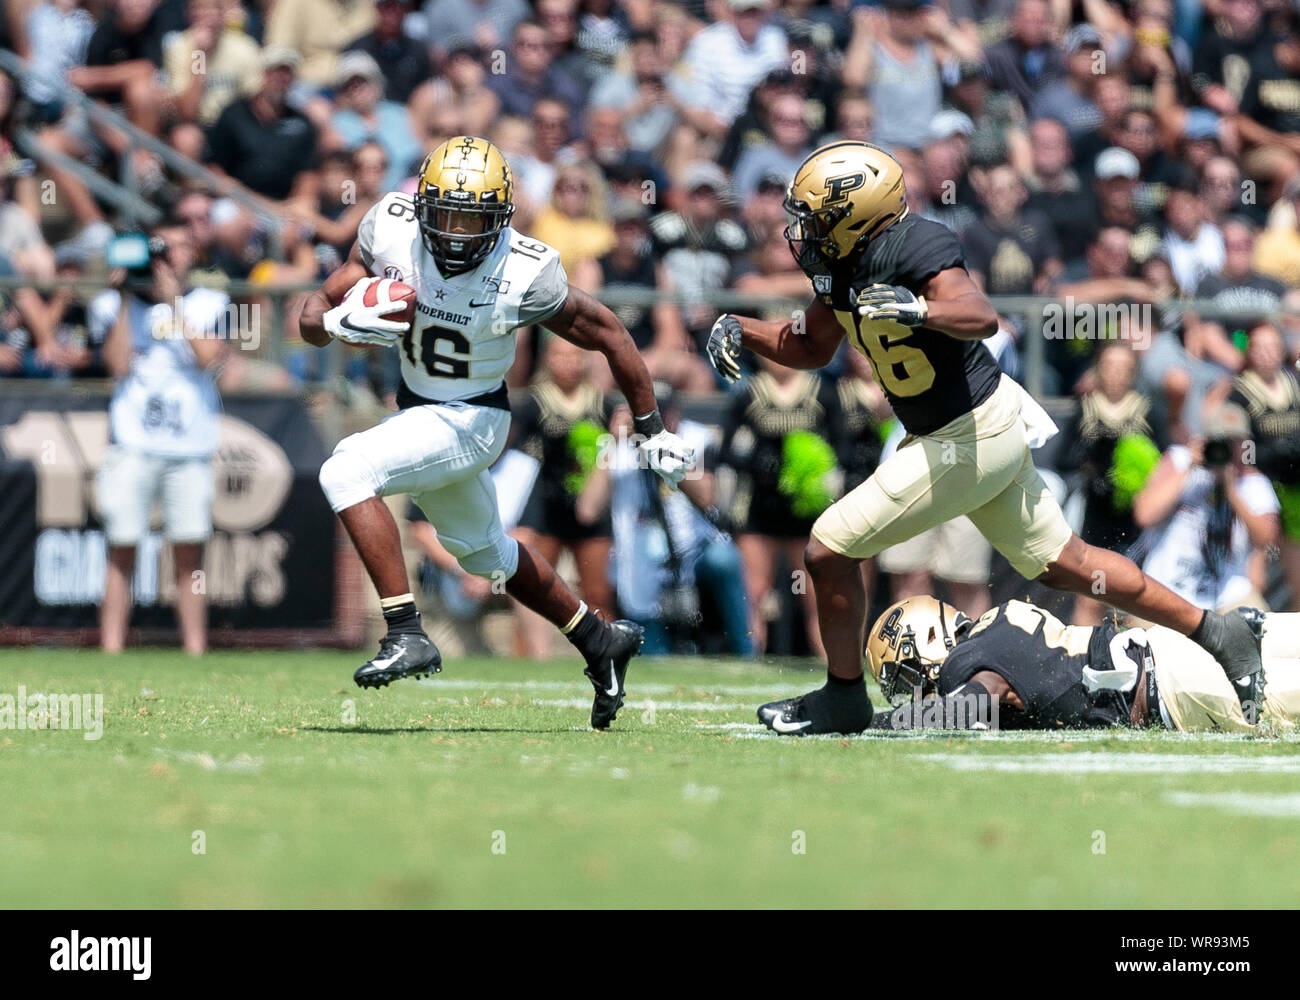 West Lafayette, Indiana, USA. 07th Sep, 2019. Vanderbilt wide receiver Kalija Lipscomb (16) runs with the ball as Purdue linebacker Jaylan Alexander (36) pursues during NCAA football game action between the Vanderbilt Commodores and the Purdue Boilermakers at Ross-Ade Stadium in West Lafayette, Indiana. Purdue defeated Vanderbilt 42-24. John Mersits/CSM/Alamy Live News Stock Photo